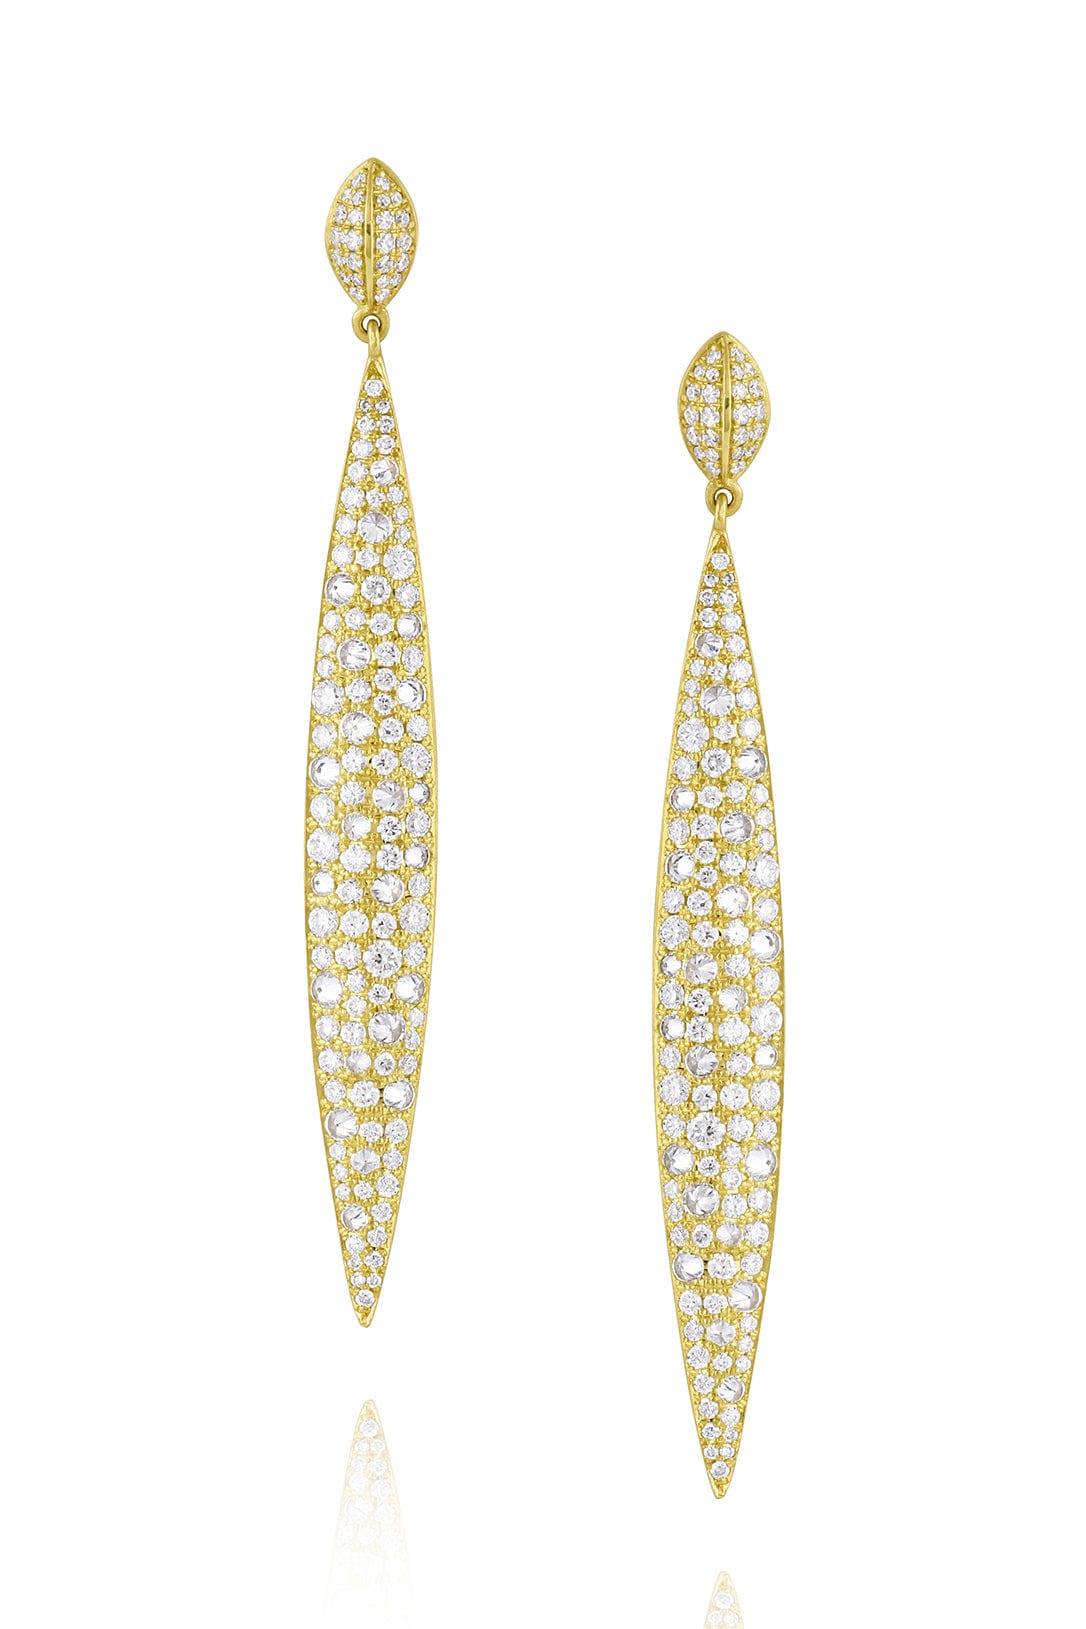 LEIGH MAXWELL-Marquis Multi Set Pave Earrings-YELLOW GOLD